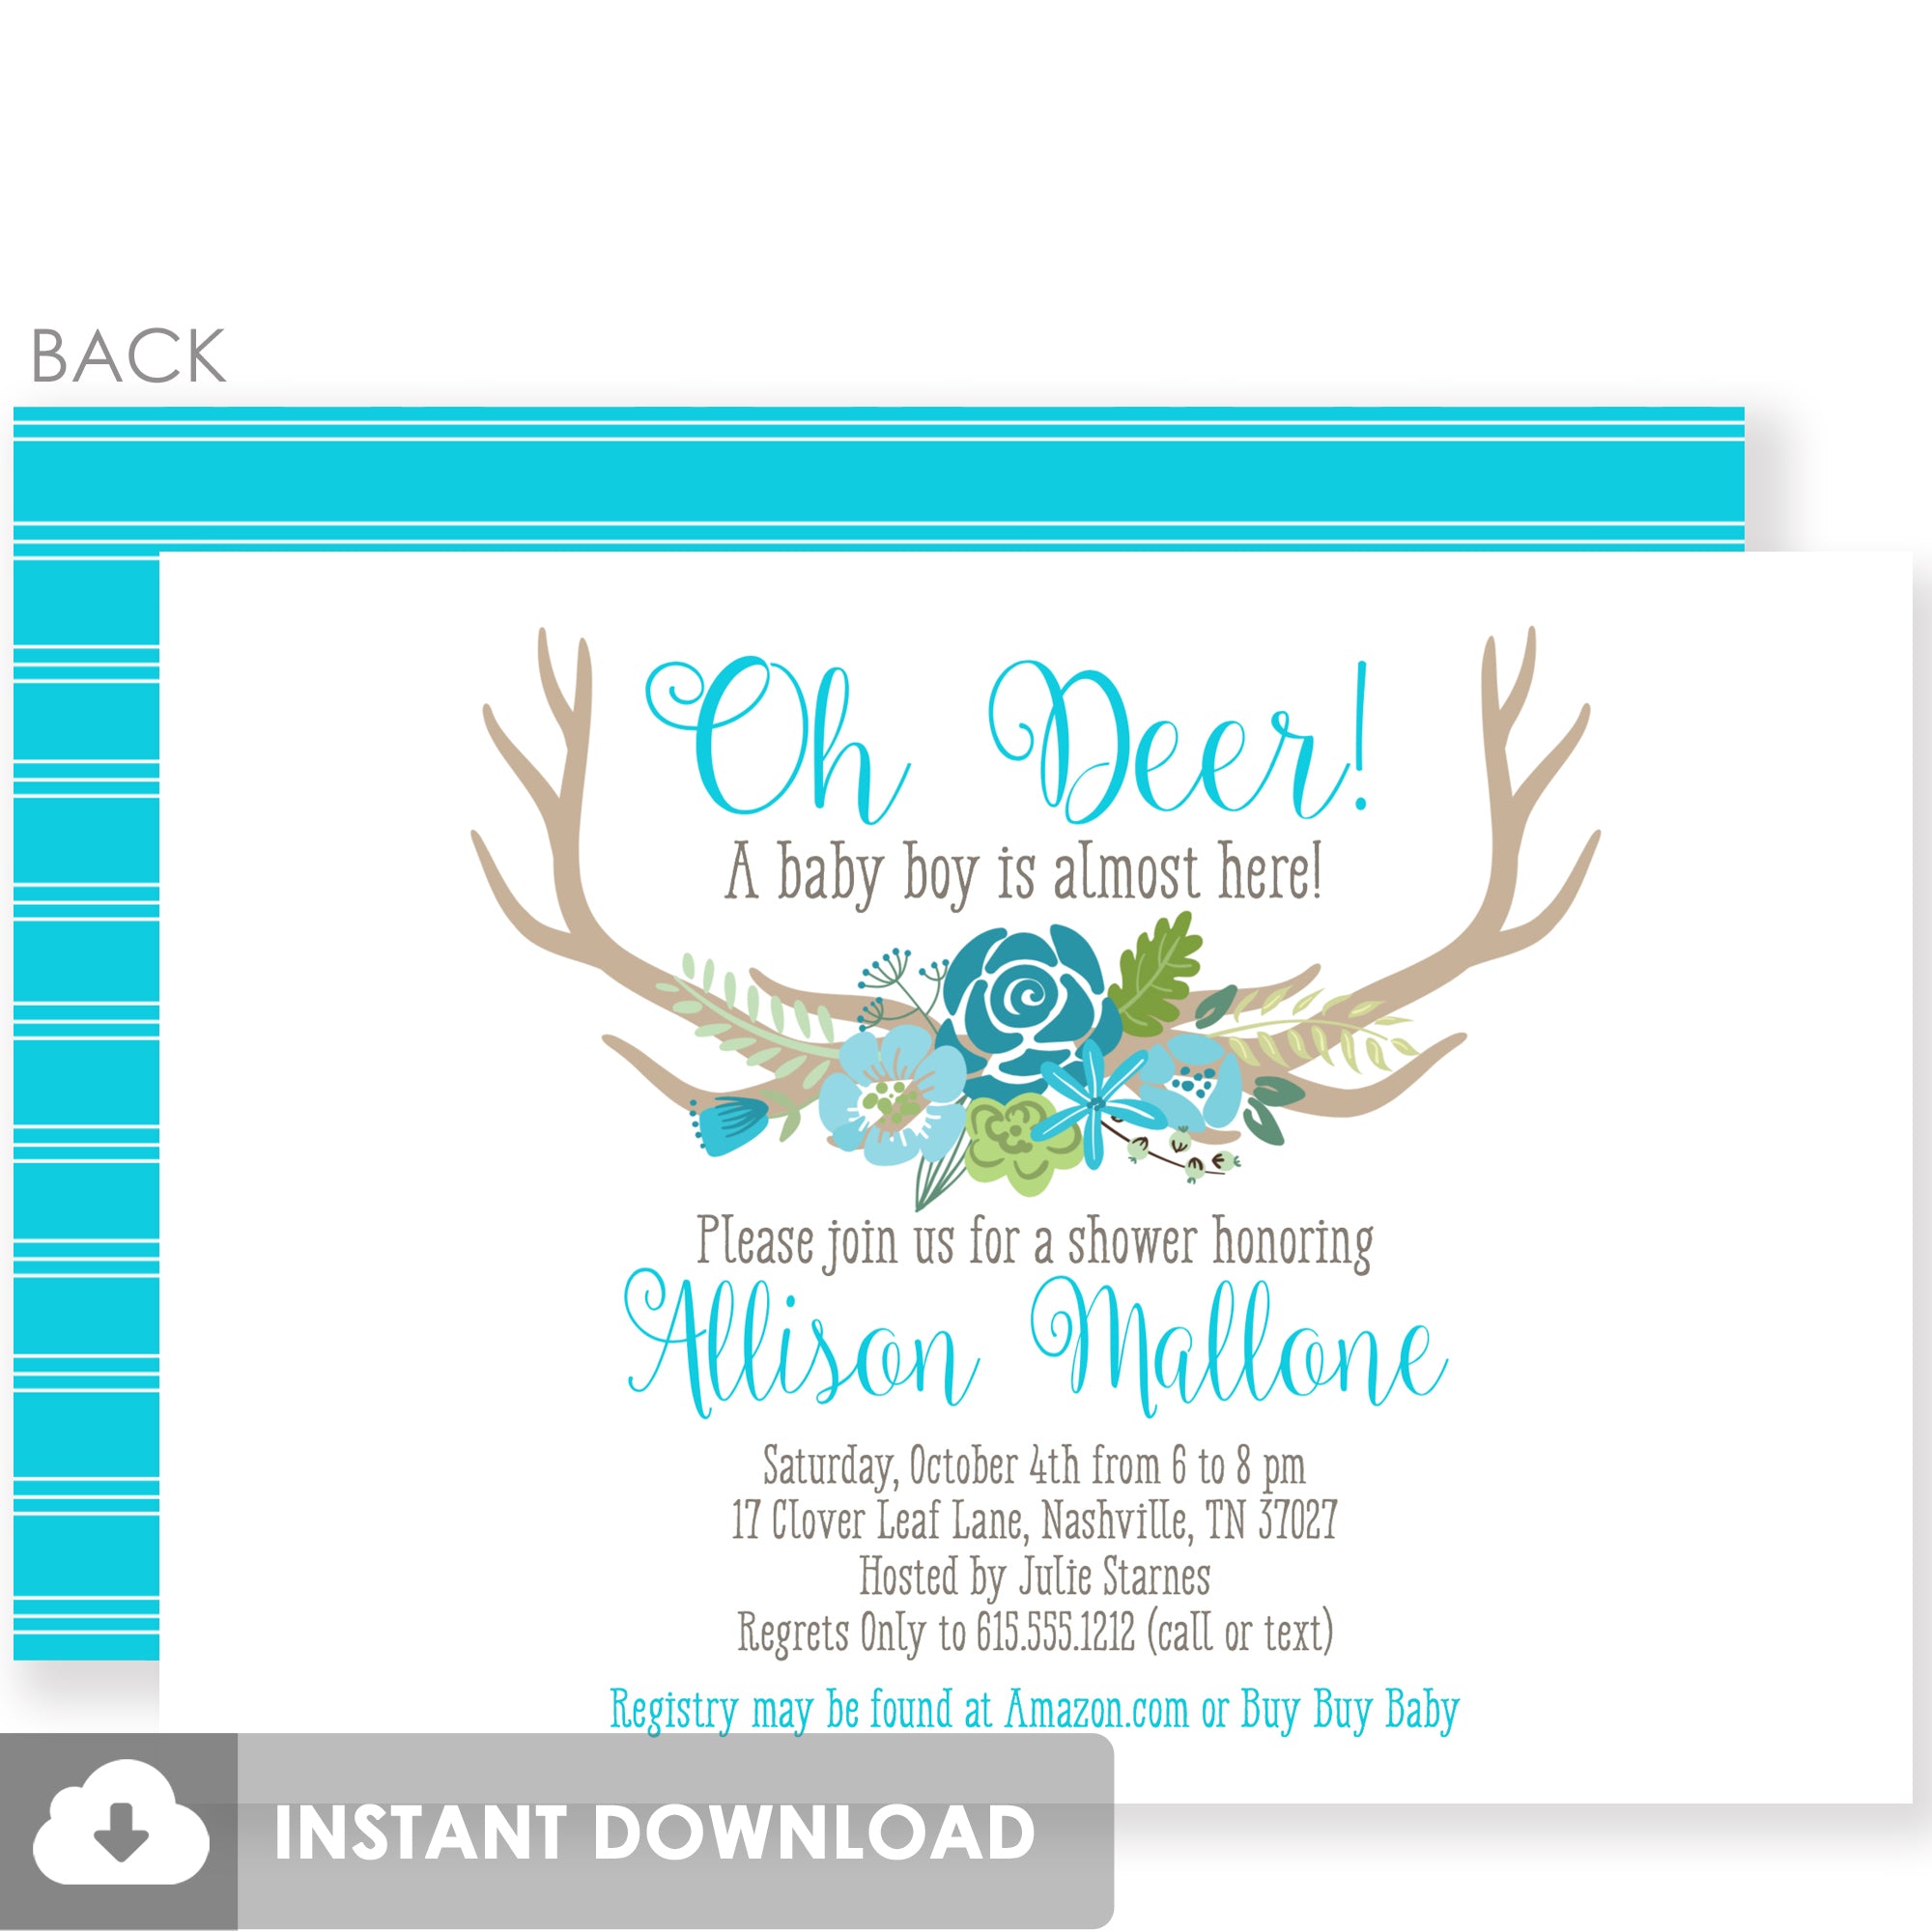 Oh Deer Boy Baby Shower Invitation | Instant Download and Fully Editable Colors | Templett Invitation | PIPSY.COM